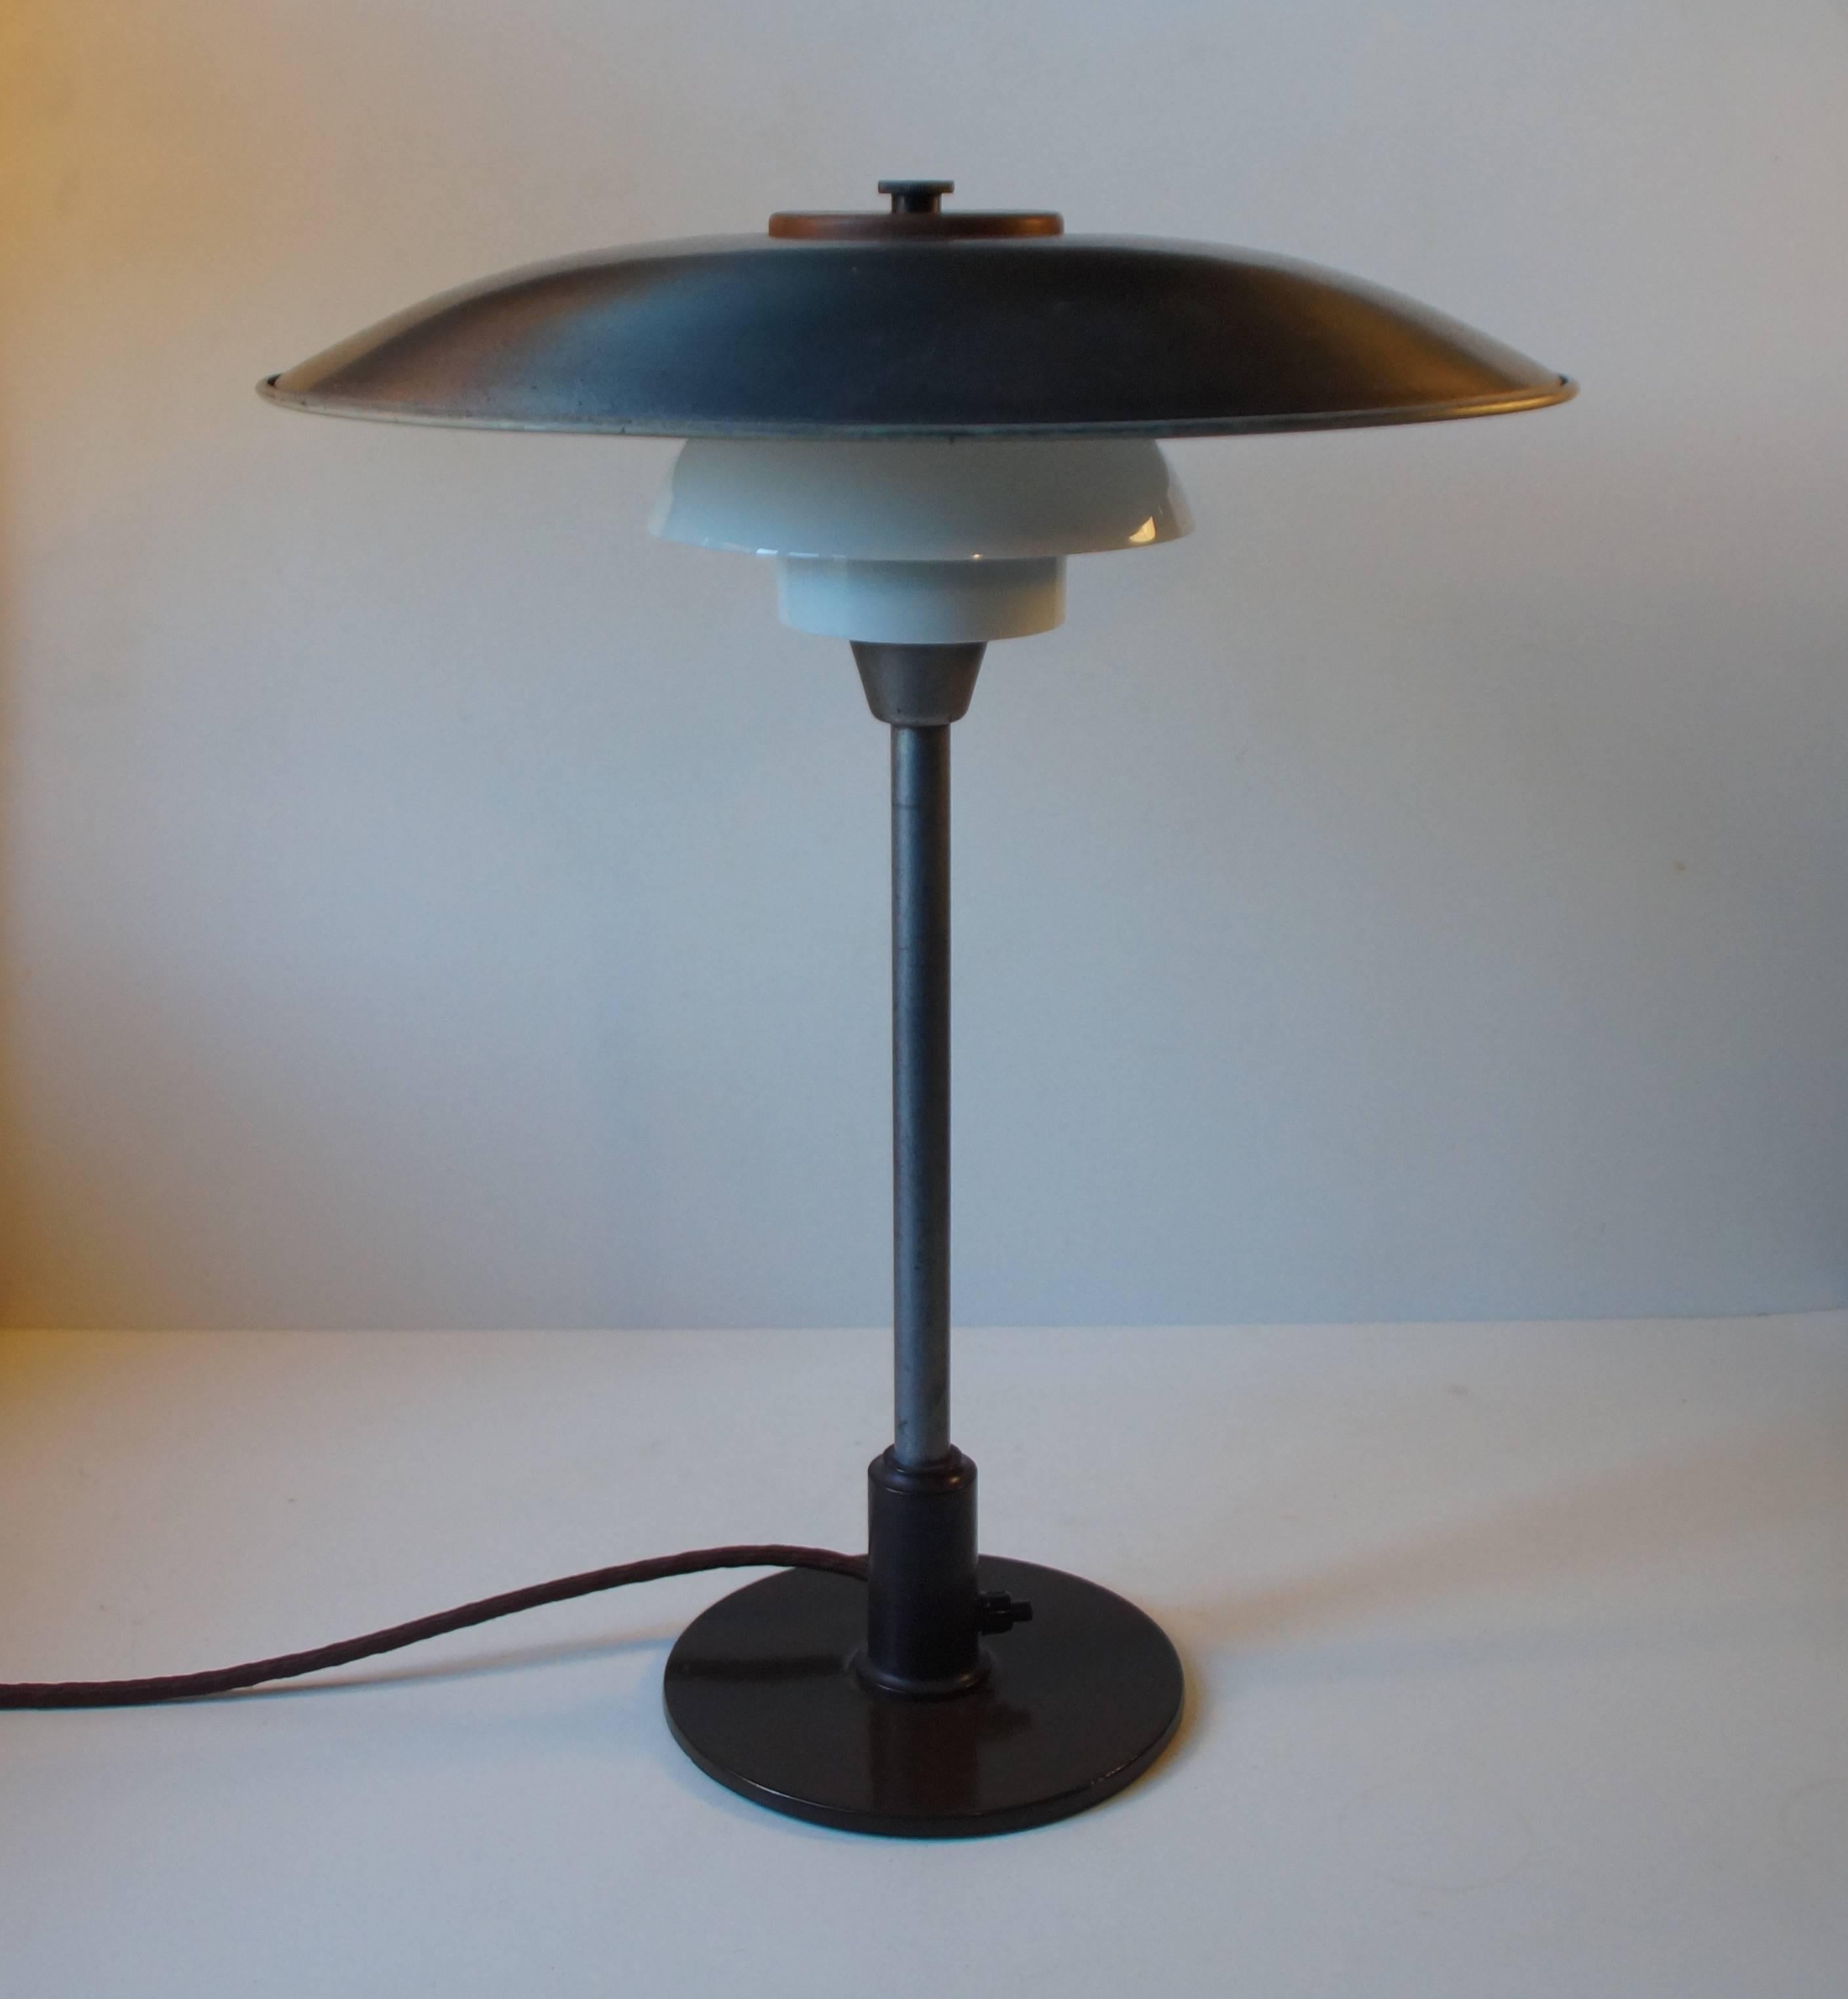 Poul Henningsen 3,5/2,5 table lamp with zinc main shade, single-layer opaline glass middle- and bottom shade and switch and socket house made of bakelite. The lamp is fully restored with the raw zinc exposed and highlighted with clear lacquer to the